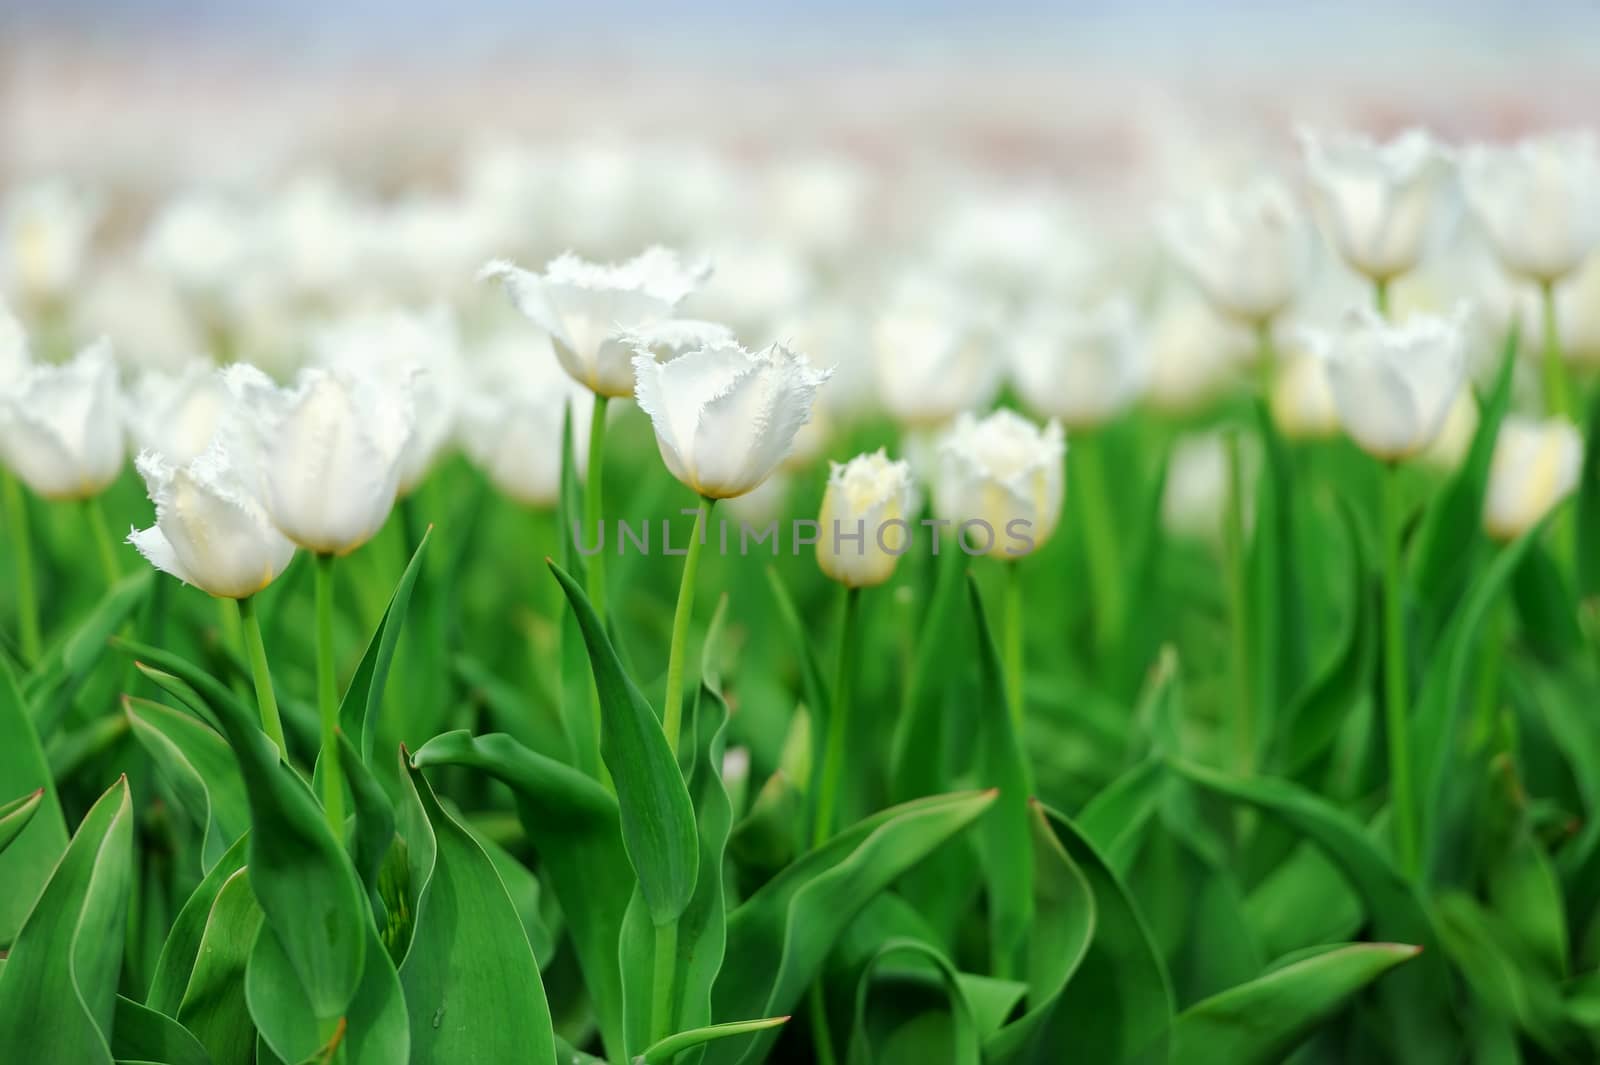 Close-up beautiful white tulips in spring field